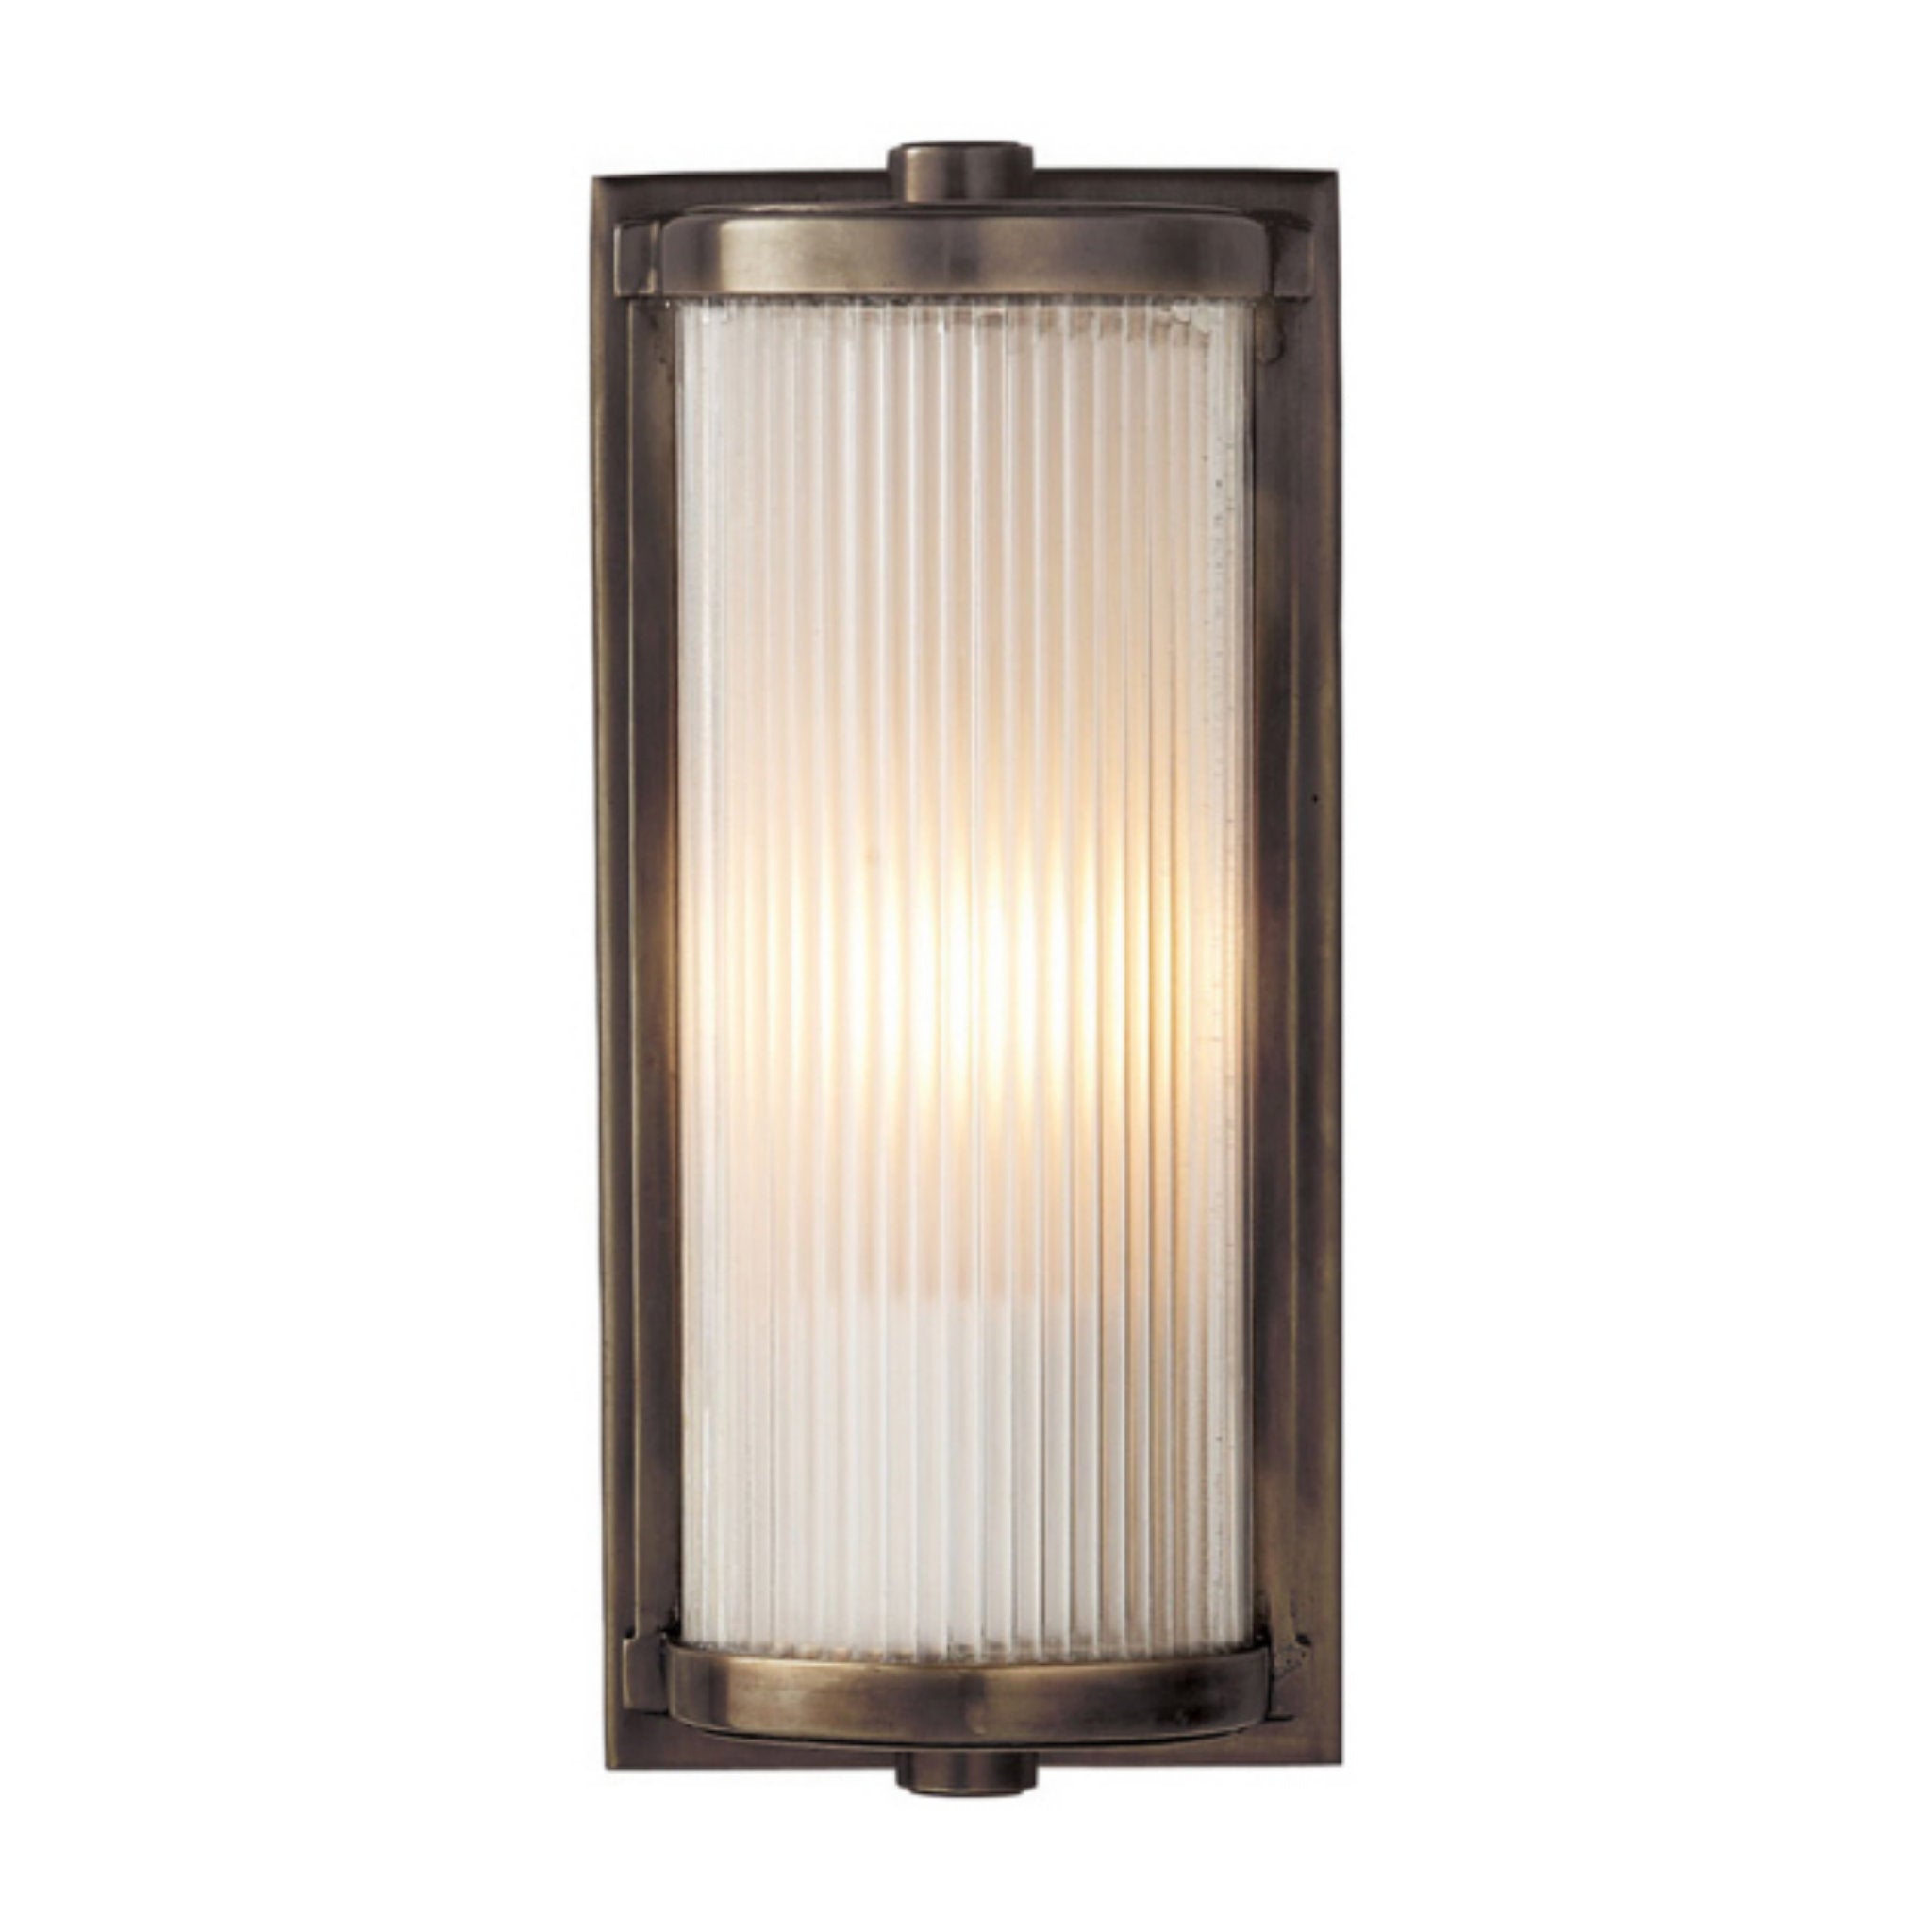 Thomas O'Brien Dresser Short Glass Rod Light in Bronze with Frosted Glass Liner